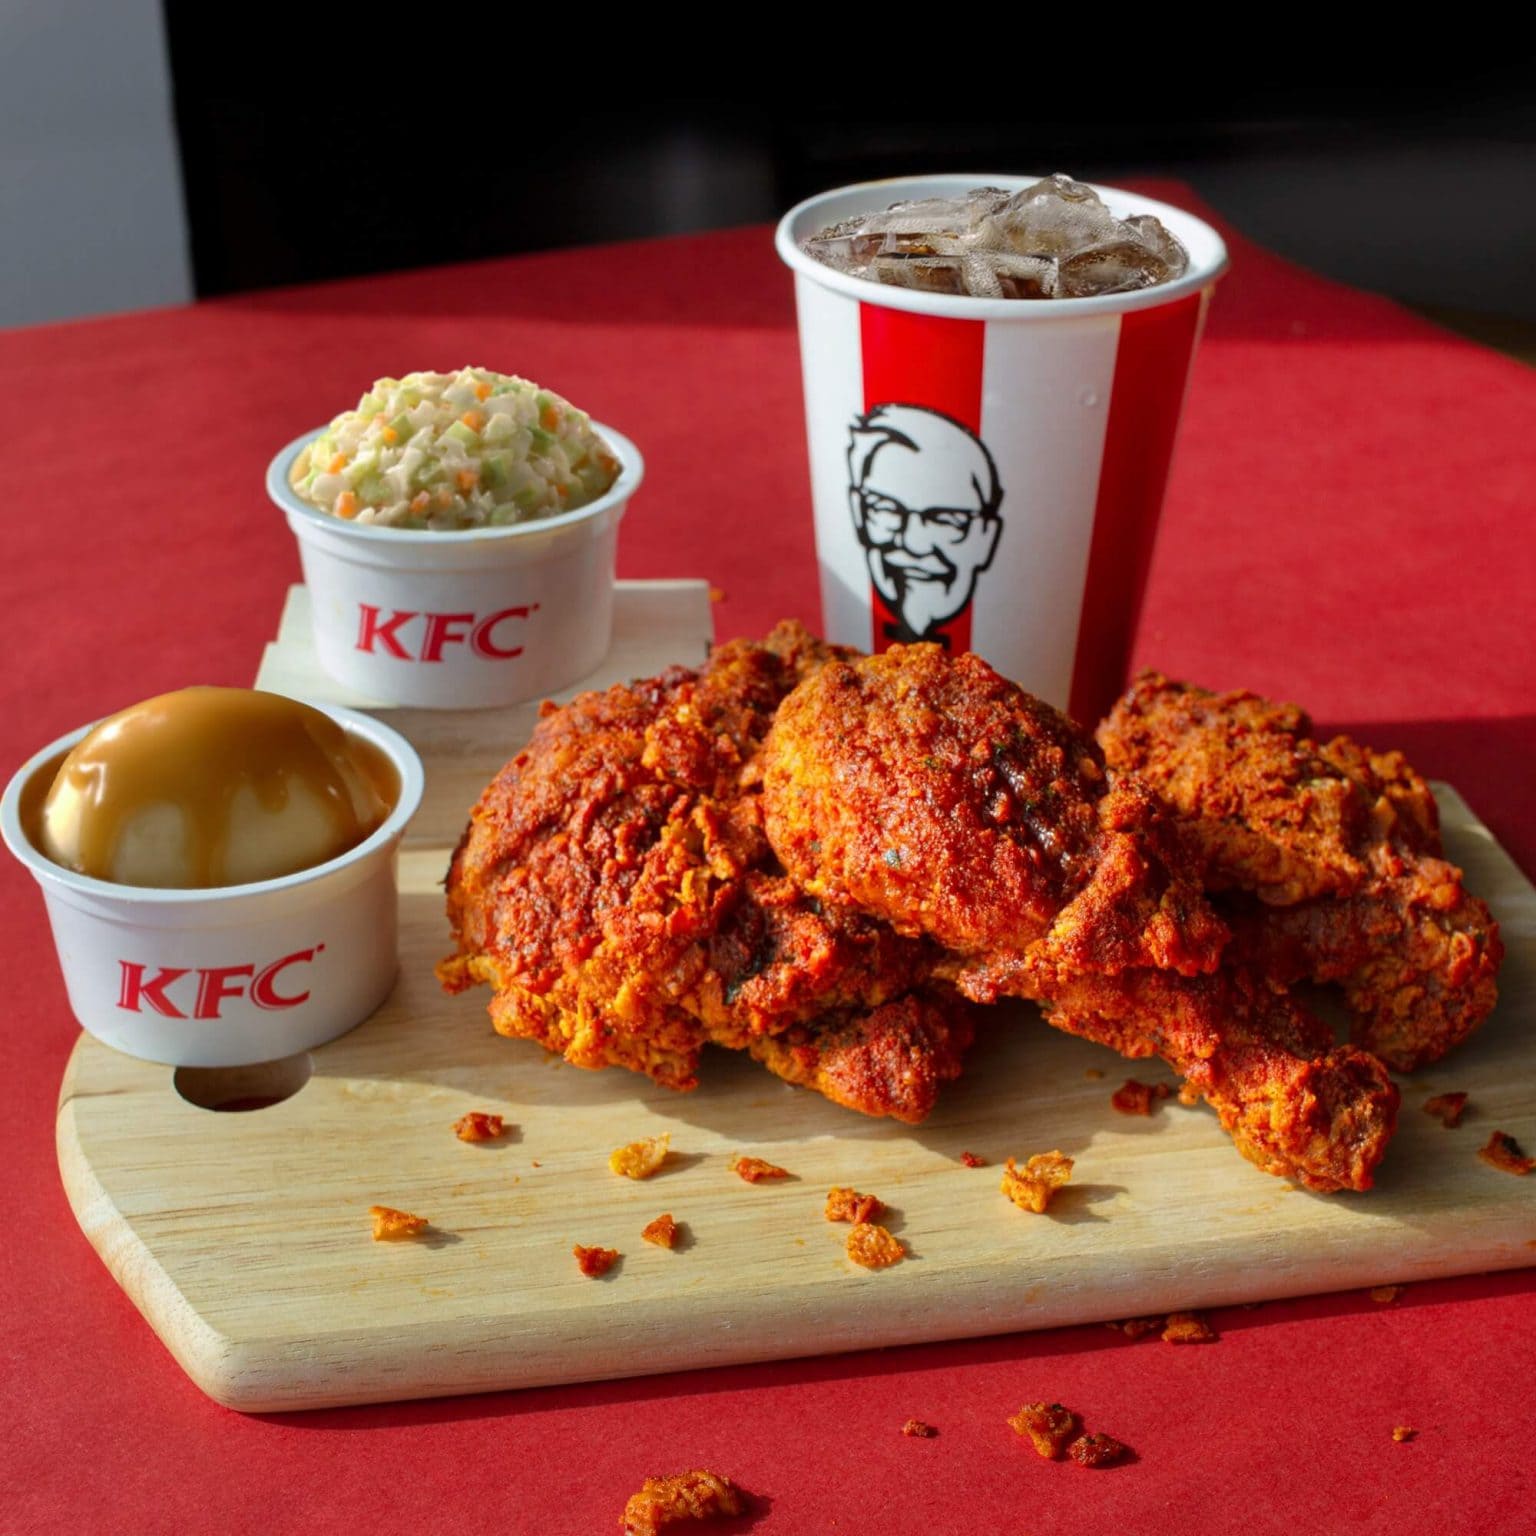 Celebrate every golden moment with finger lickin’ good Kentucky Fried Chicken.